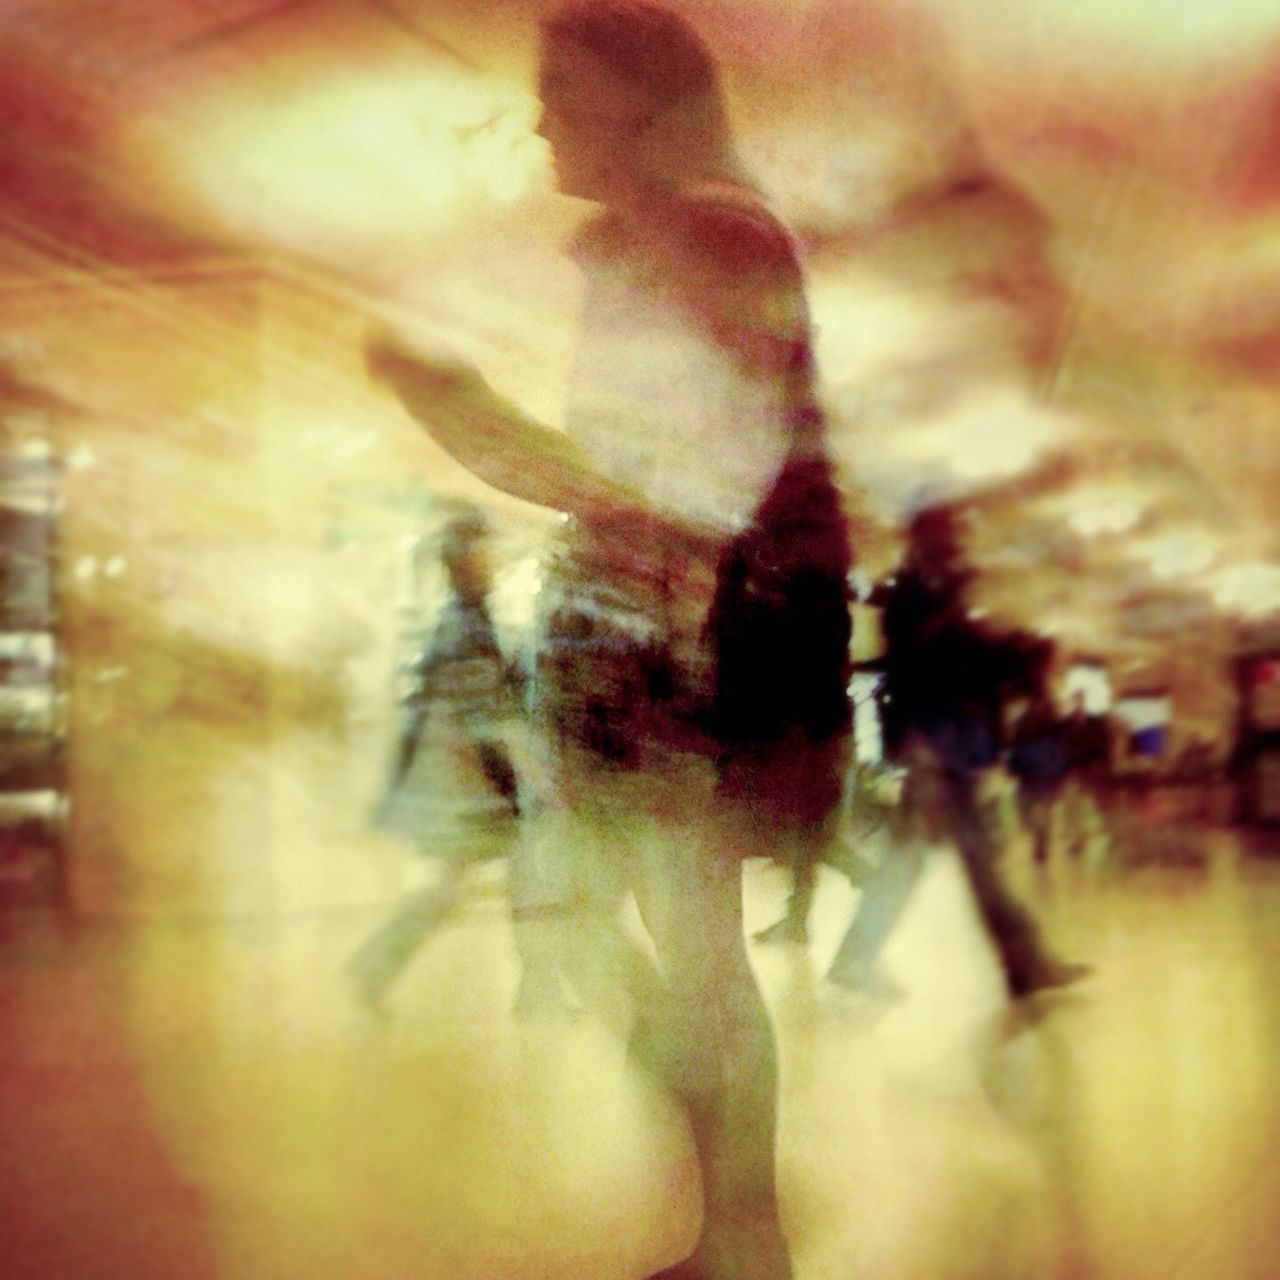 lifestyles, selective focus, leisure activity, focus on foreground, defocused, person, indoors, unrecognizable person, blurred motion, men, reflection, glass - material, close-up, walking, day, street, transparent